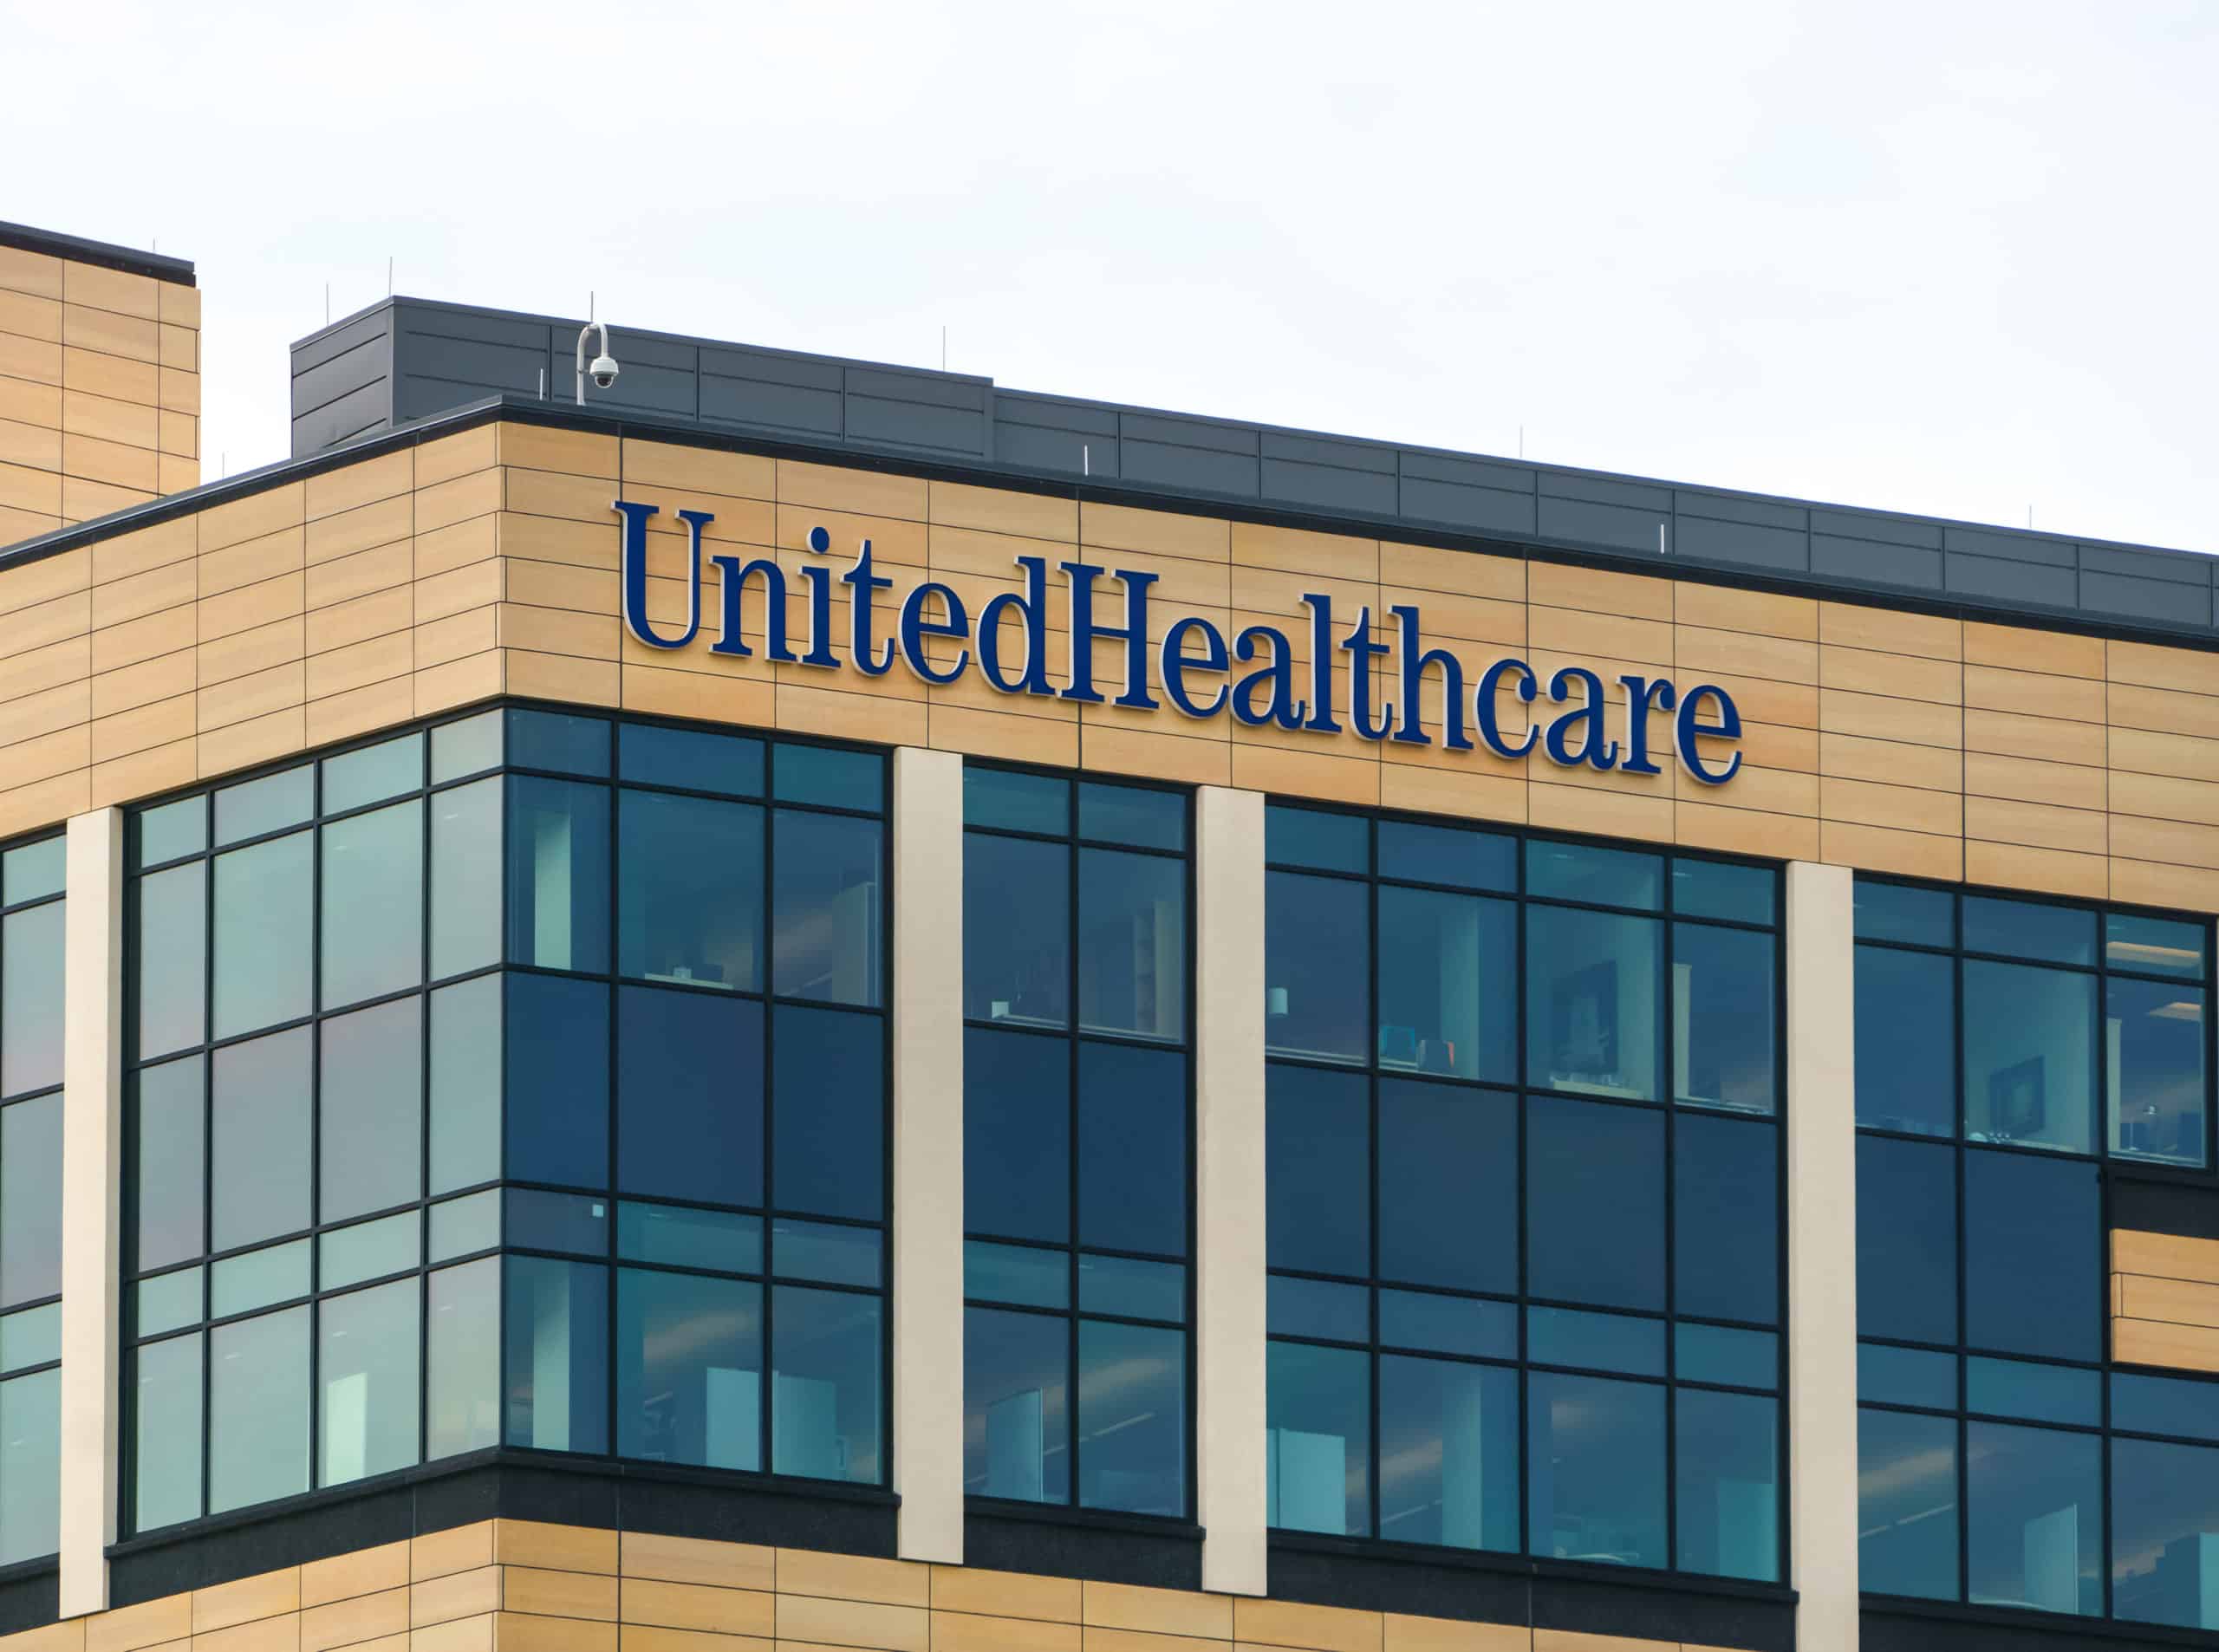 United Healthcare is one of the nation’s largest health insurance providers. They offer a wide variety of plans with varying degrees of coverage for addiction treatment.